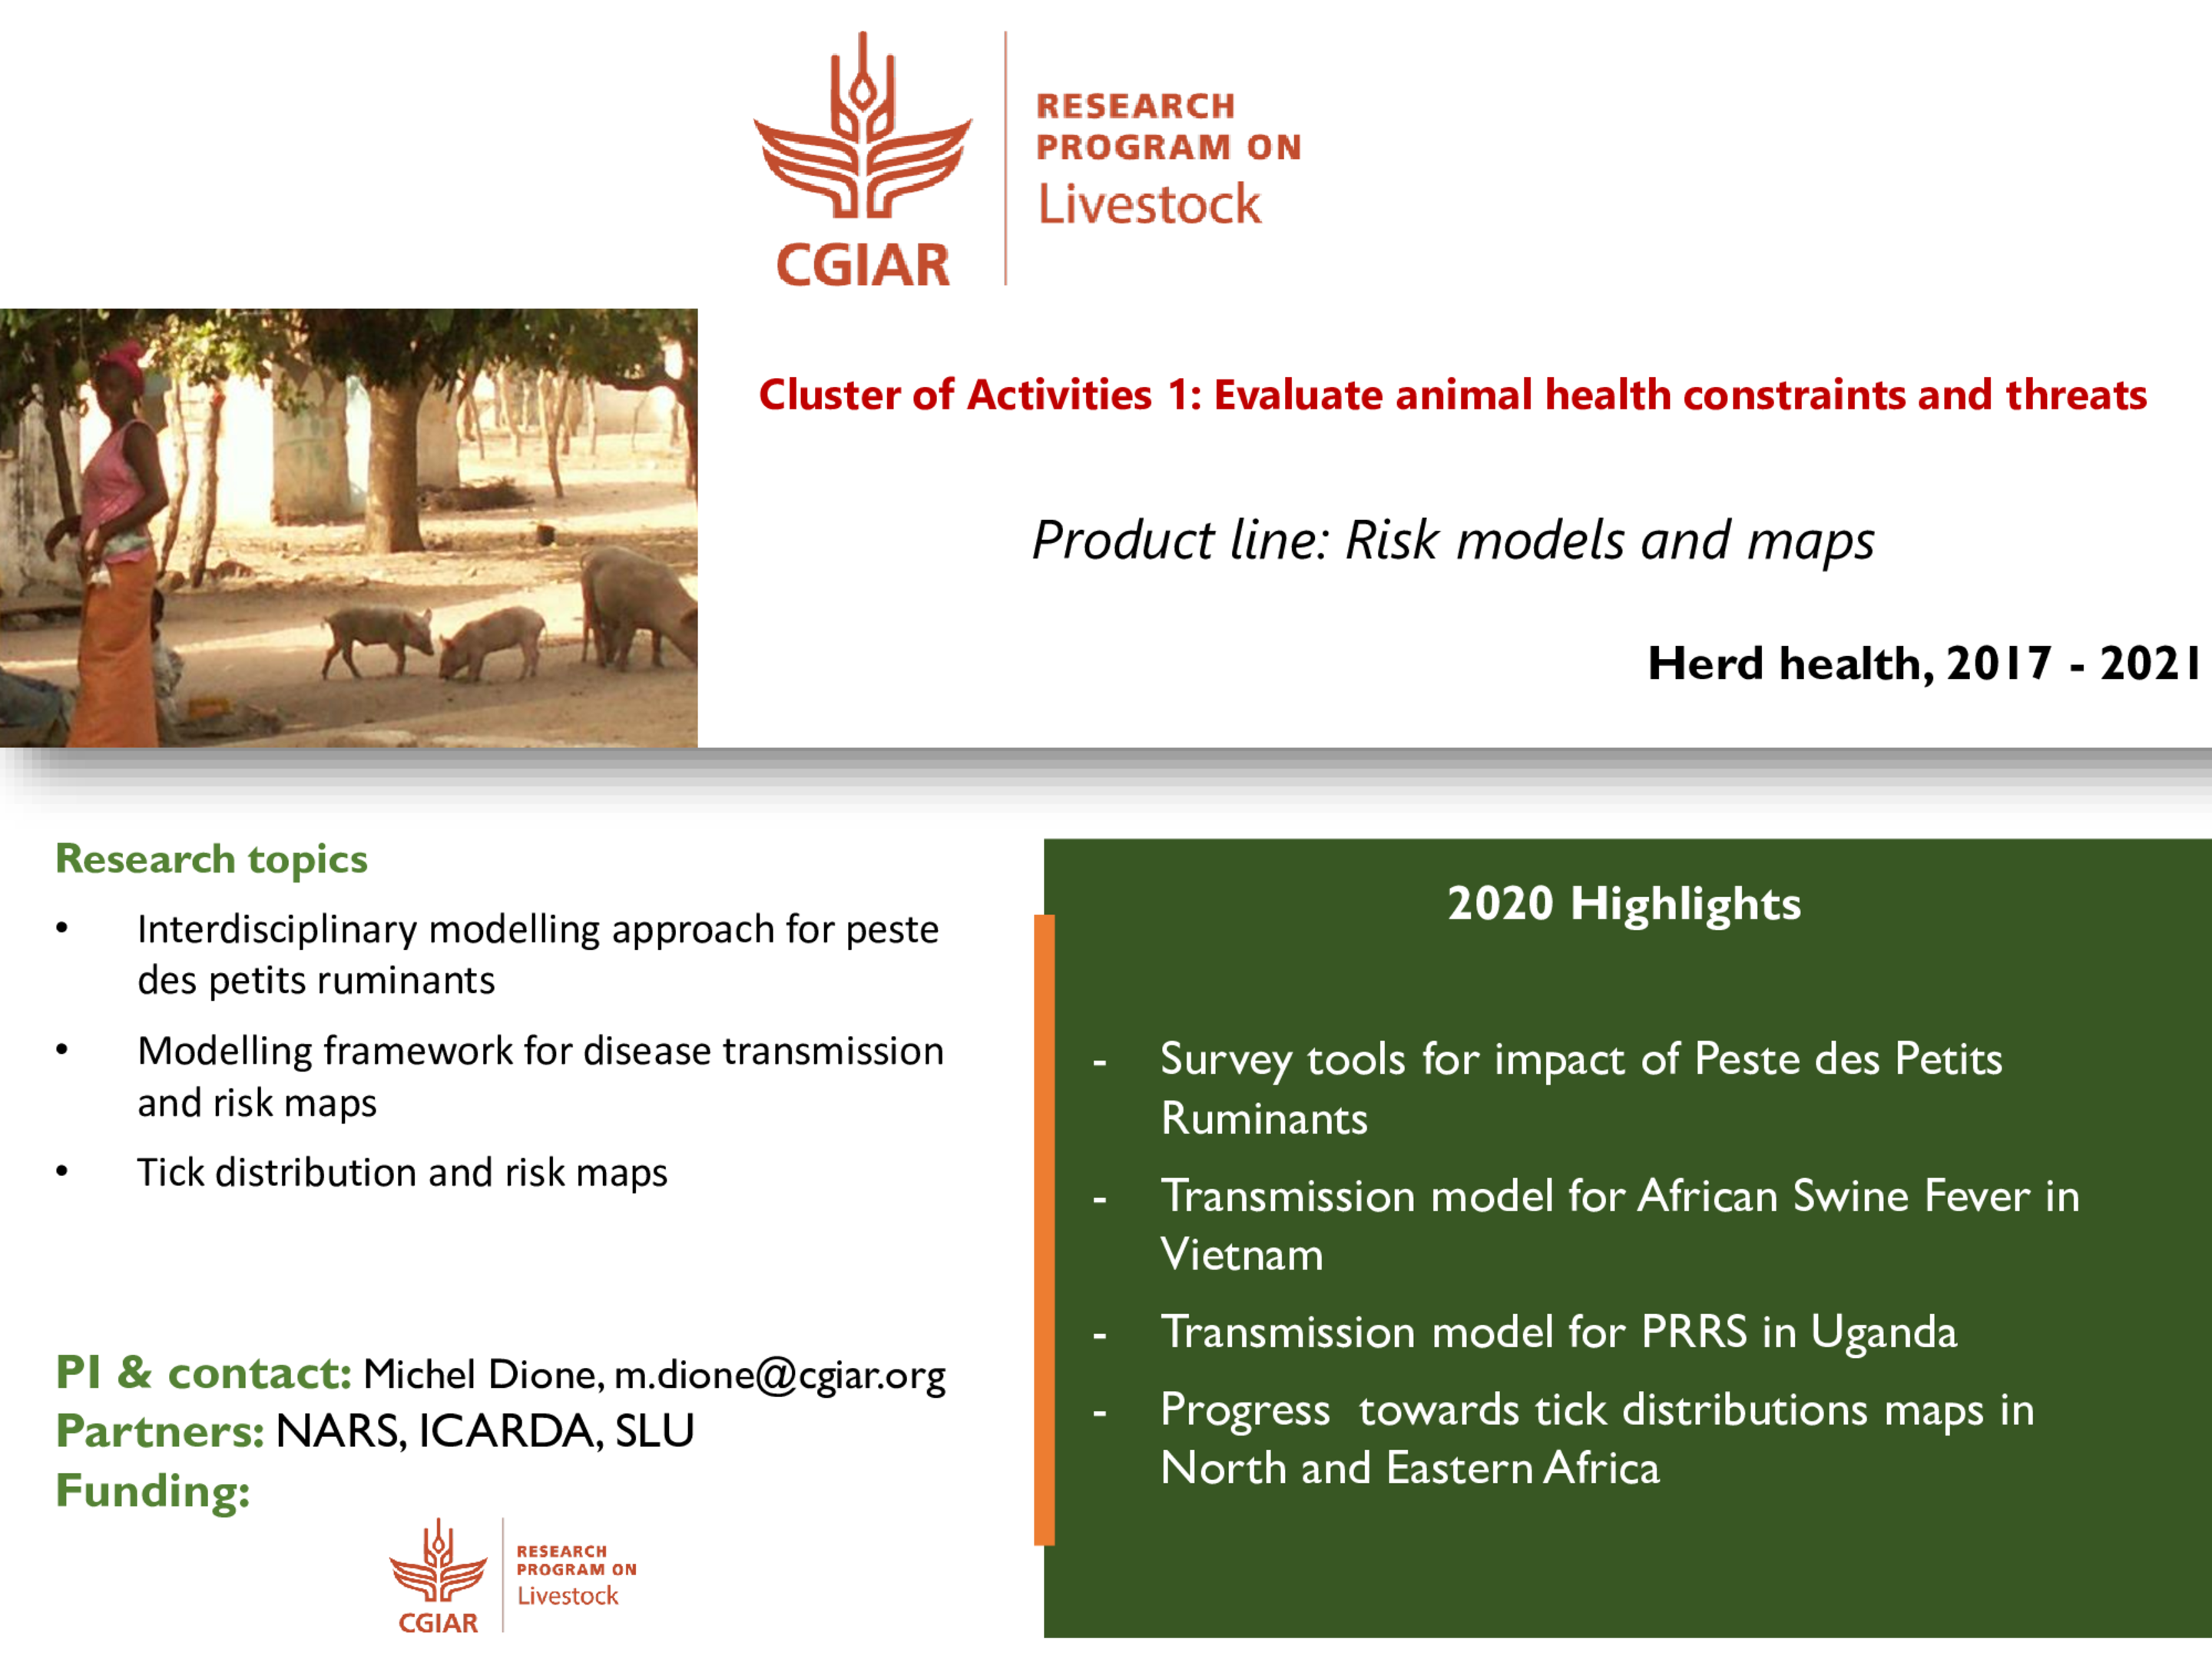 Cluster of Activities 1: Evaluate animal health constraints and threats - Product line: Risk models and maps